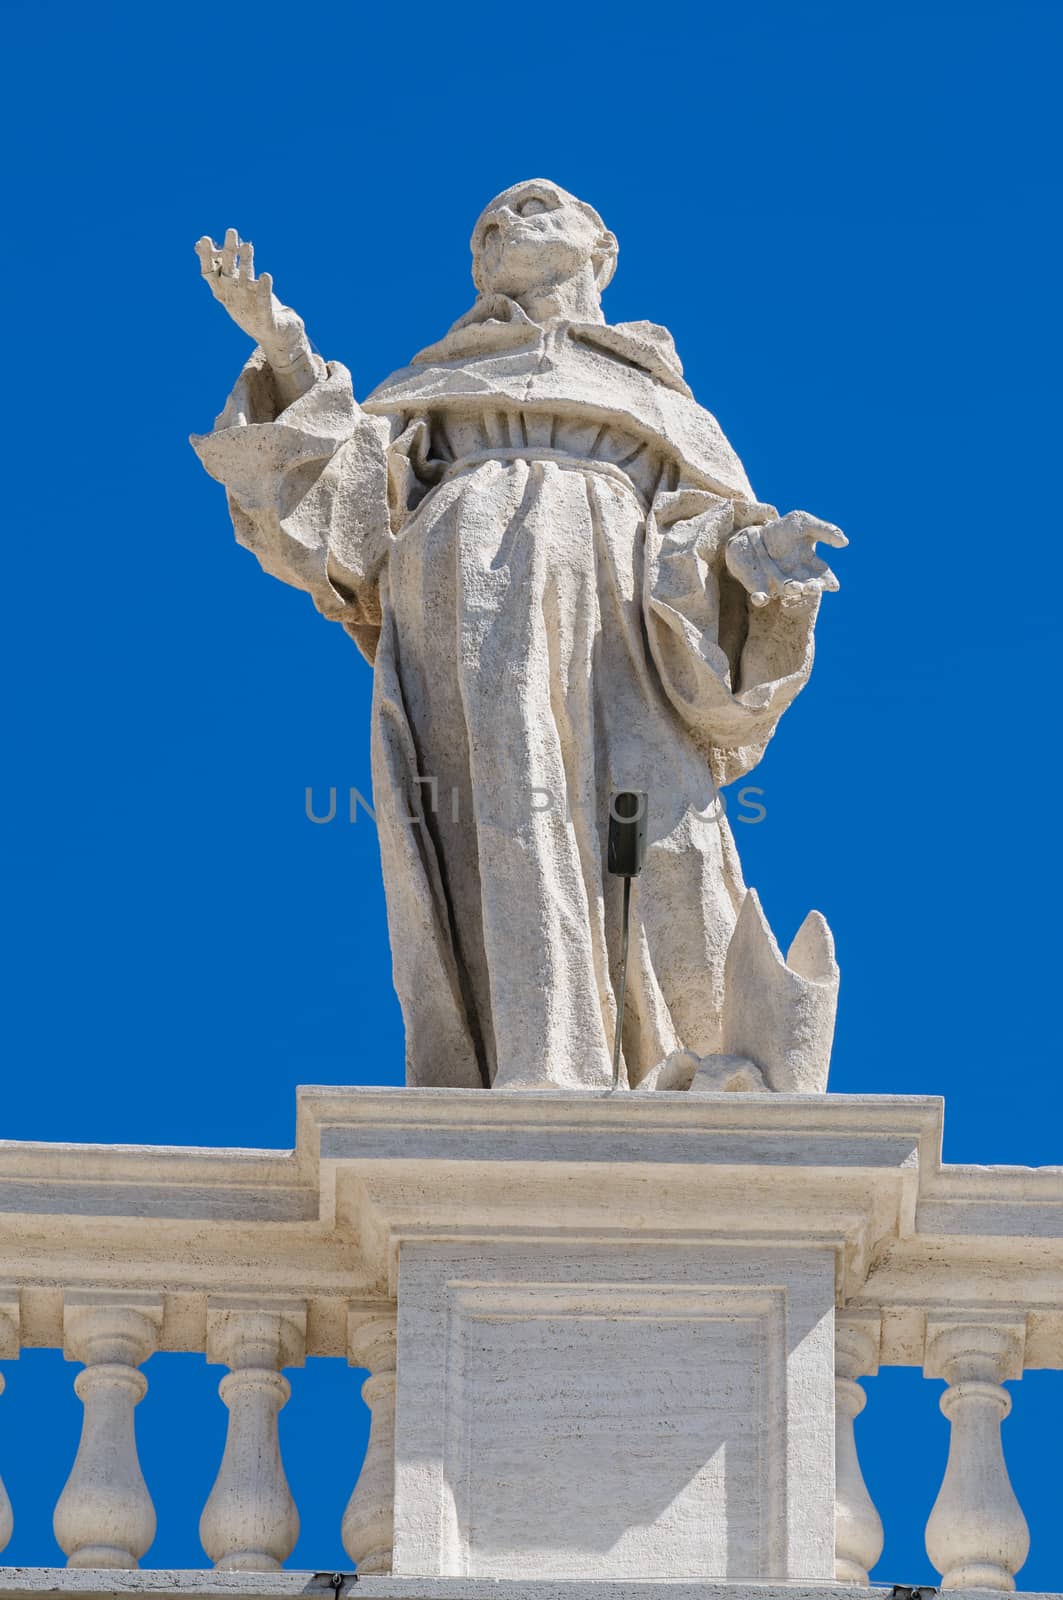 Statues on the roof of St. Peter Cathedral in Rome, Italy